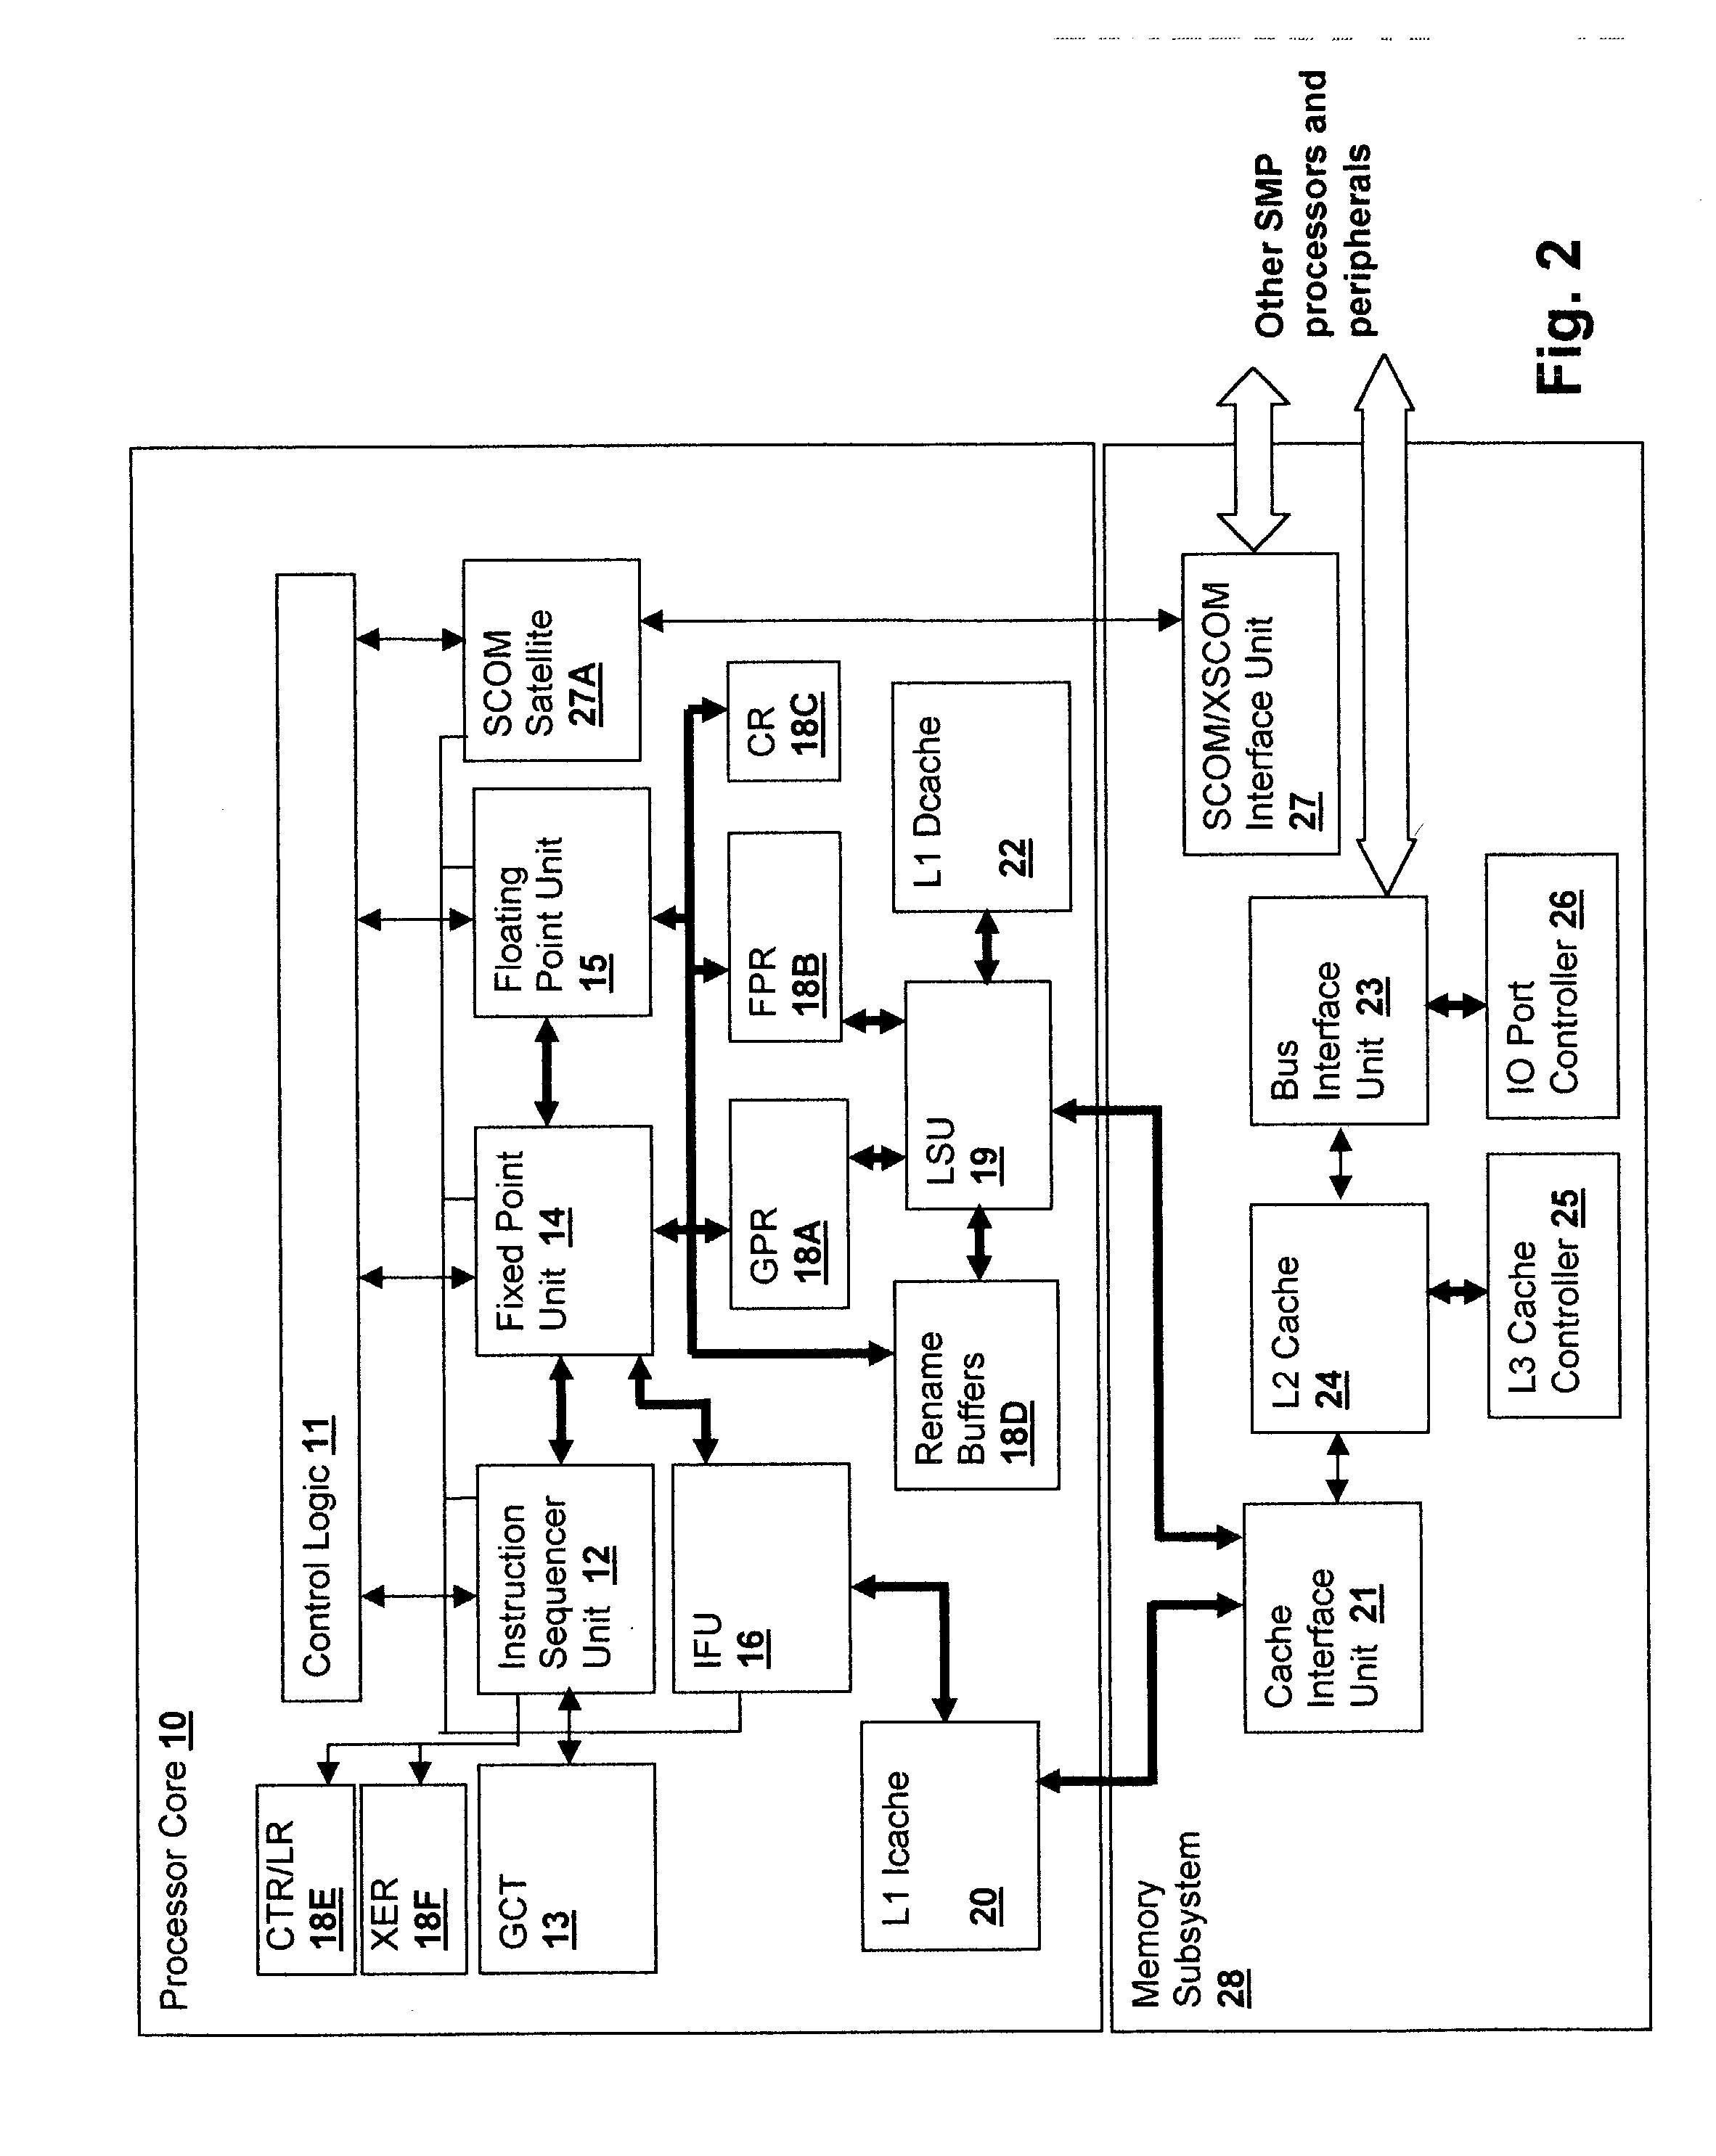 Method and apparatus for sending thread-execution-state-sensitive supervisory commands to a simultaneous multi-threaded (SMT) processor